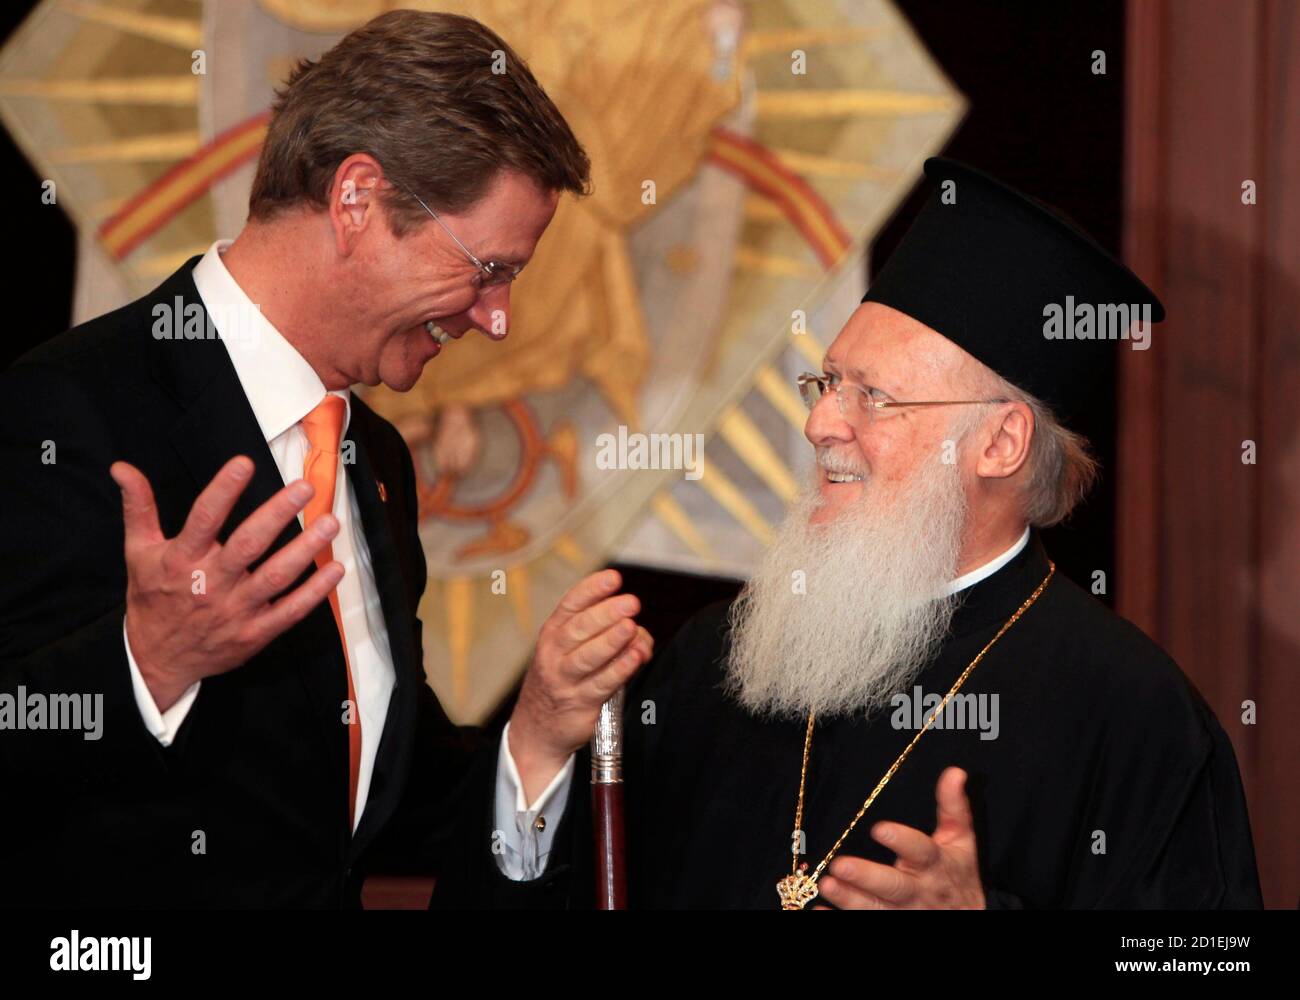 Germany's Foreign Minister Guido Westerwelle (L), leader of Germany's liberal party, the Free Democratic Party (FDP), chats with Ecumenical Orthodox Patriarch Bartholomew I at the Greek Orthodox Patriarchate in Istanbul January 8, 2010. REUTERS/Murad Sezer (TURKEY - Tags: POLITICS RELIGION SOCIETY) Stock Photo